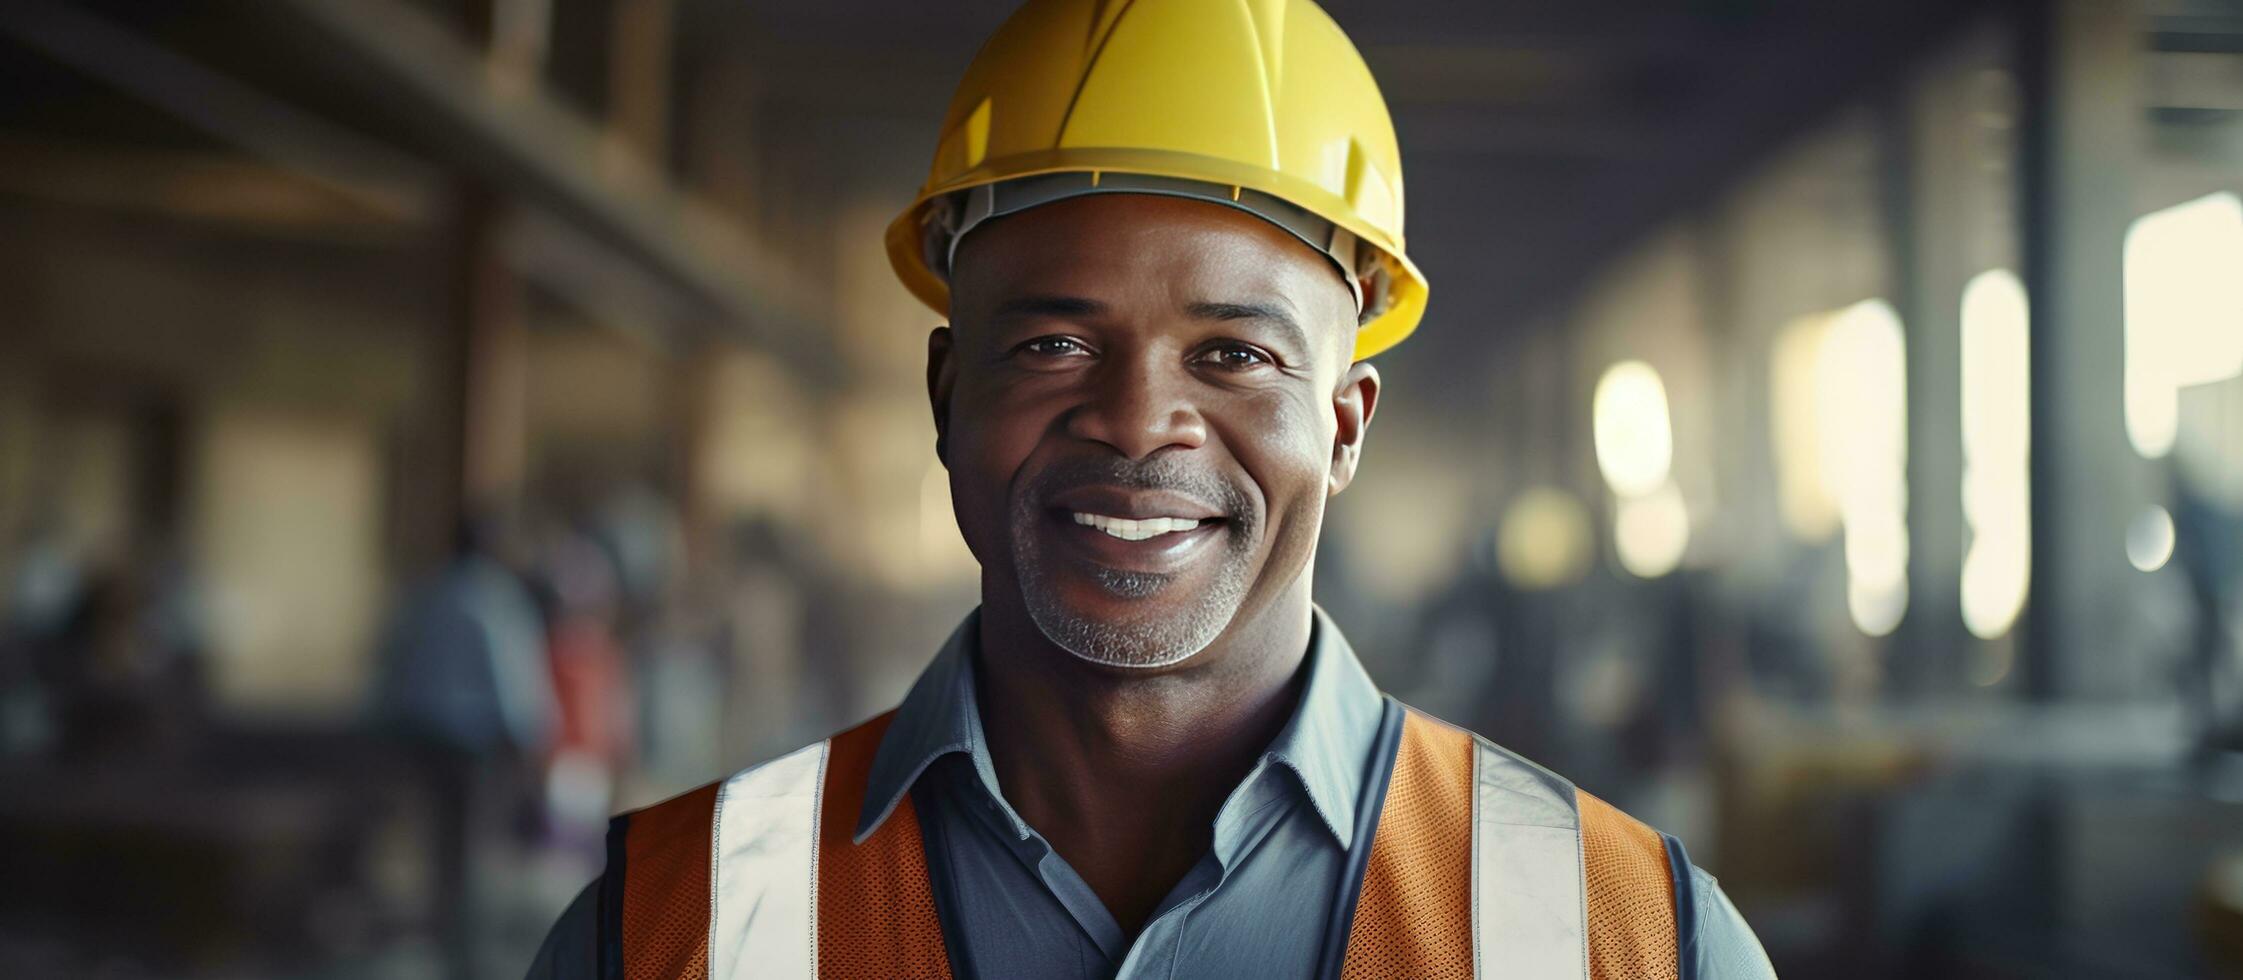 Smiling construction worker at building site photo